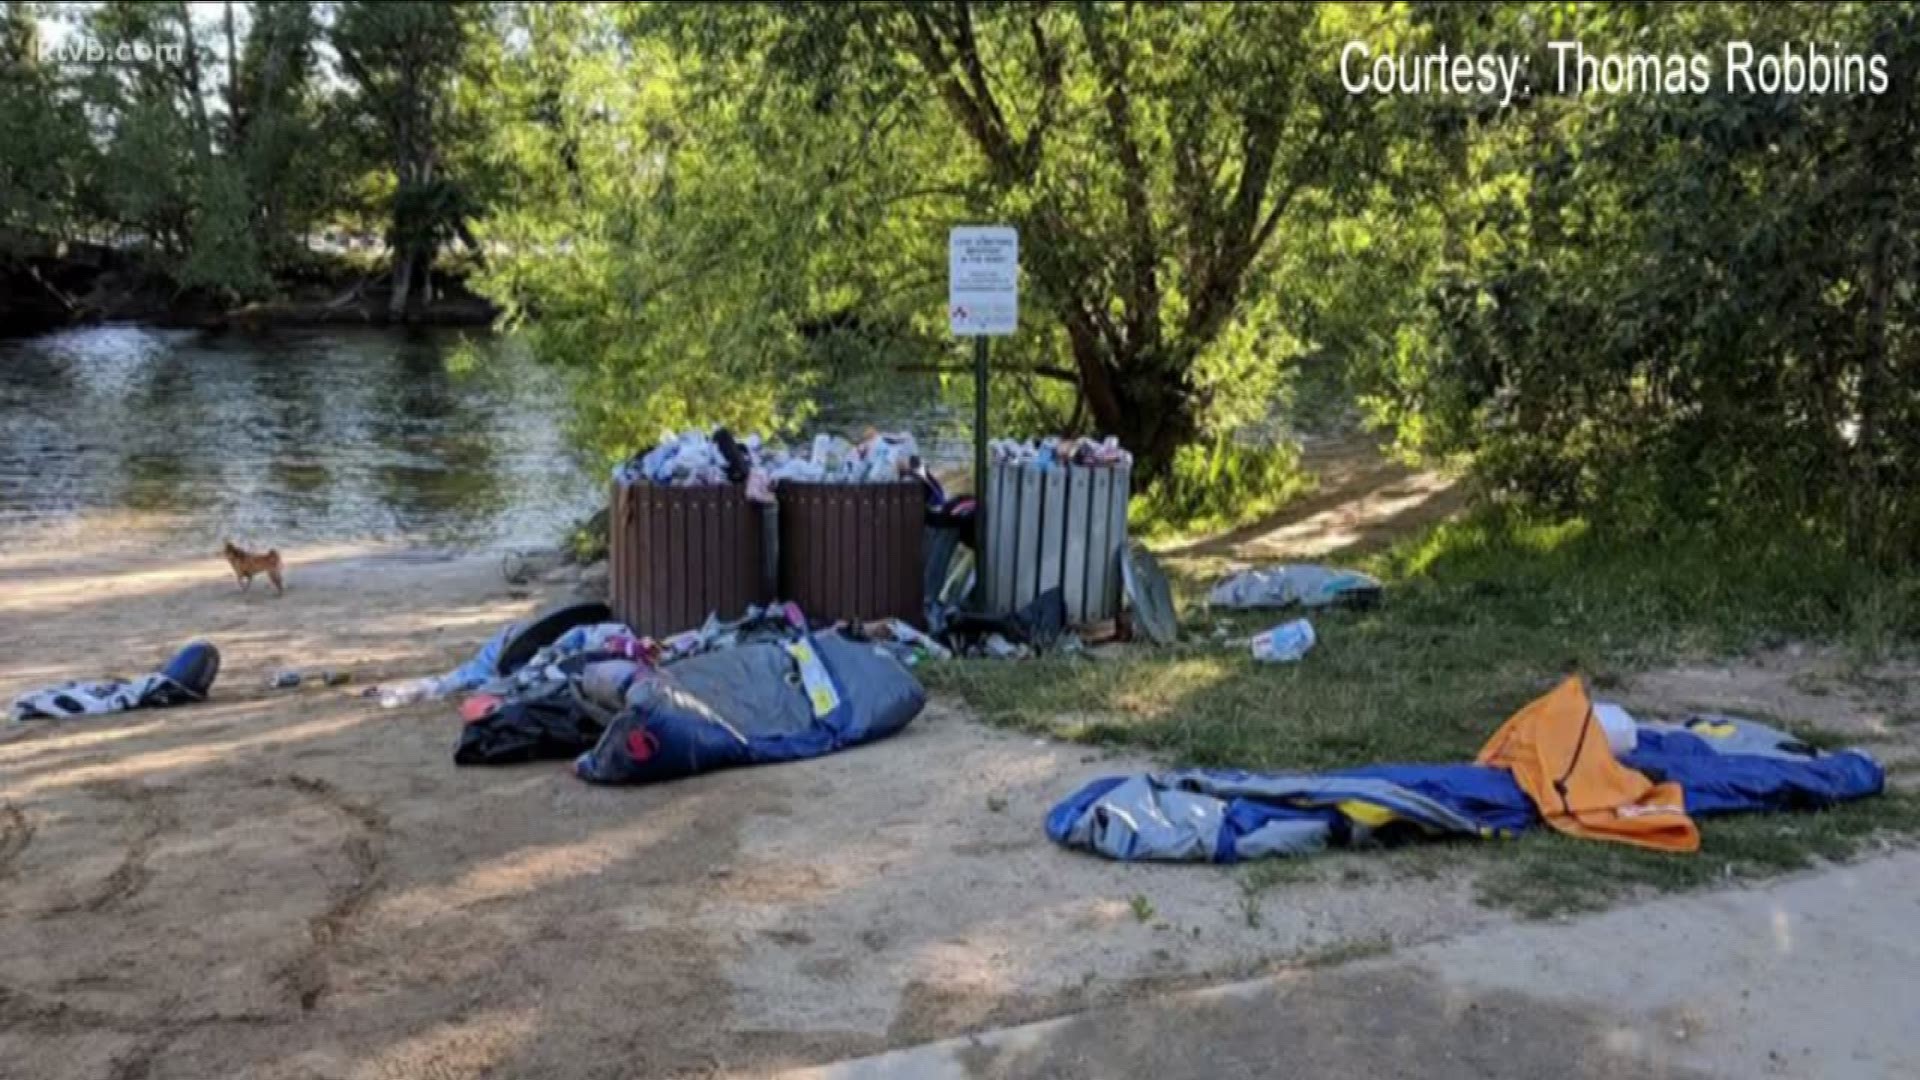 Boise Parks and Recreation wants people to keep the river clean.